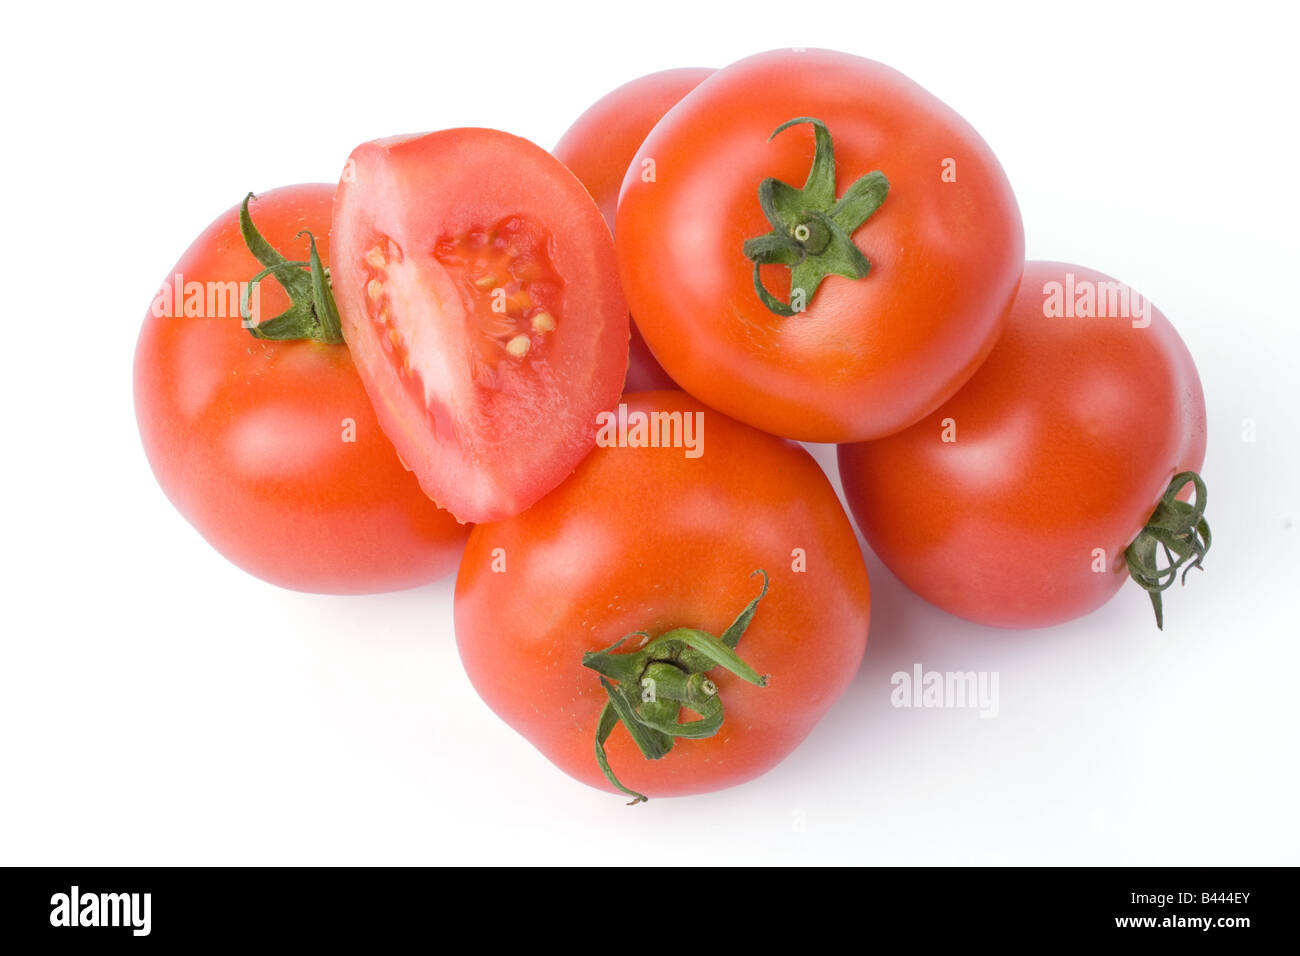 Ripe tomatoes isolated on a white background with one cut in a quarter Stock Photo